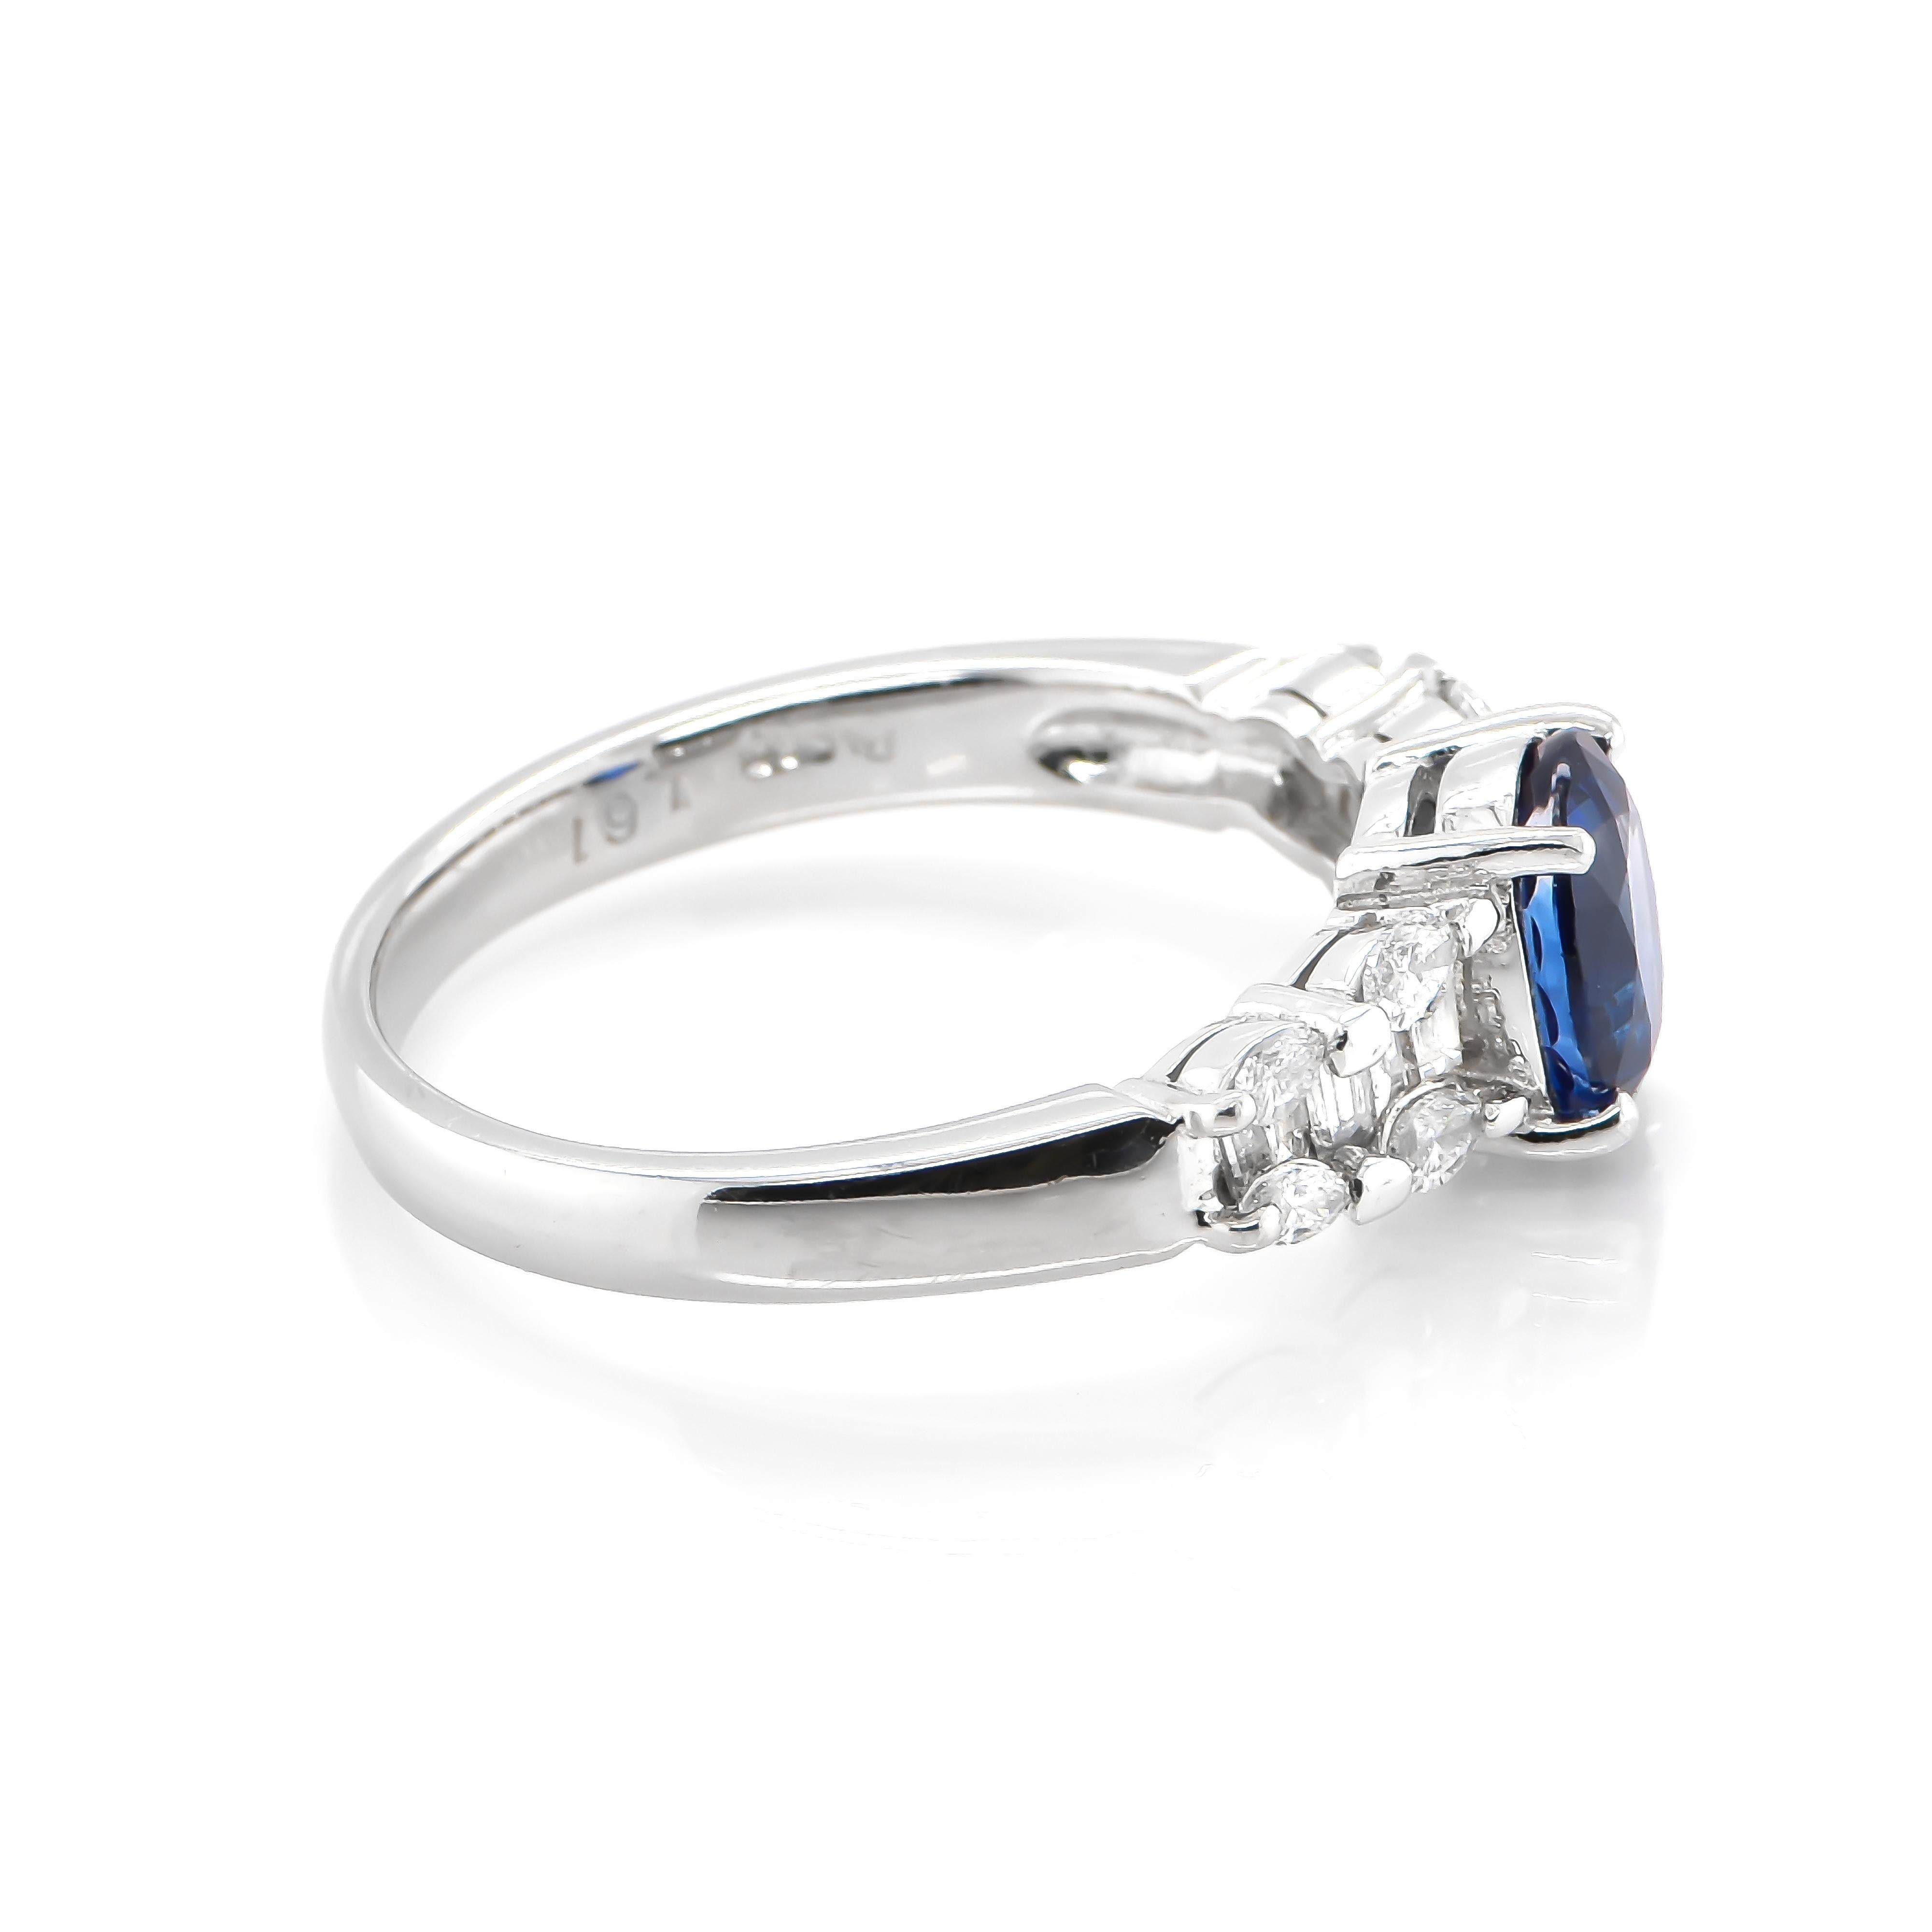 Oval Cut 1.61 Carat Natural Royal Blue Sapphire and Diamond Ring Made in Platinum For Sale